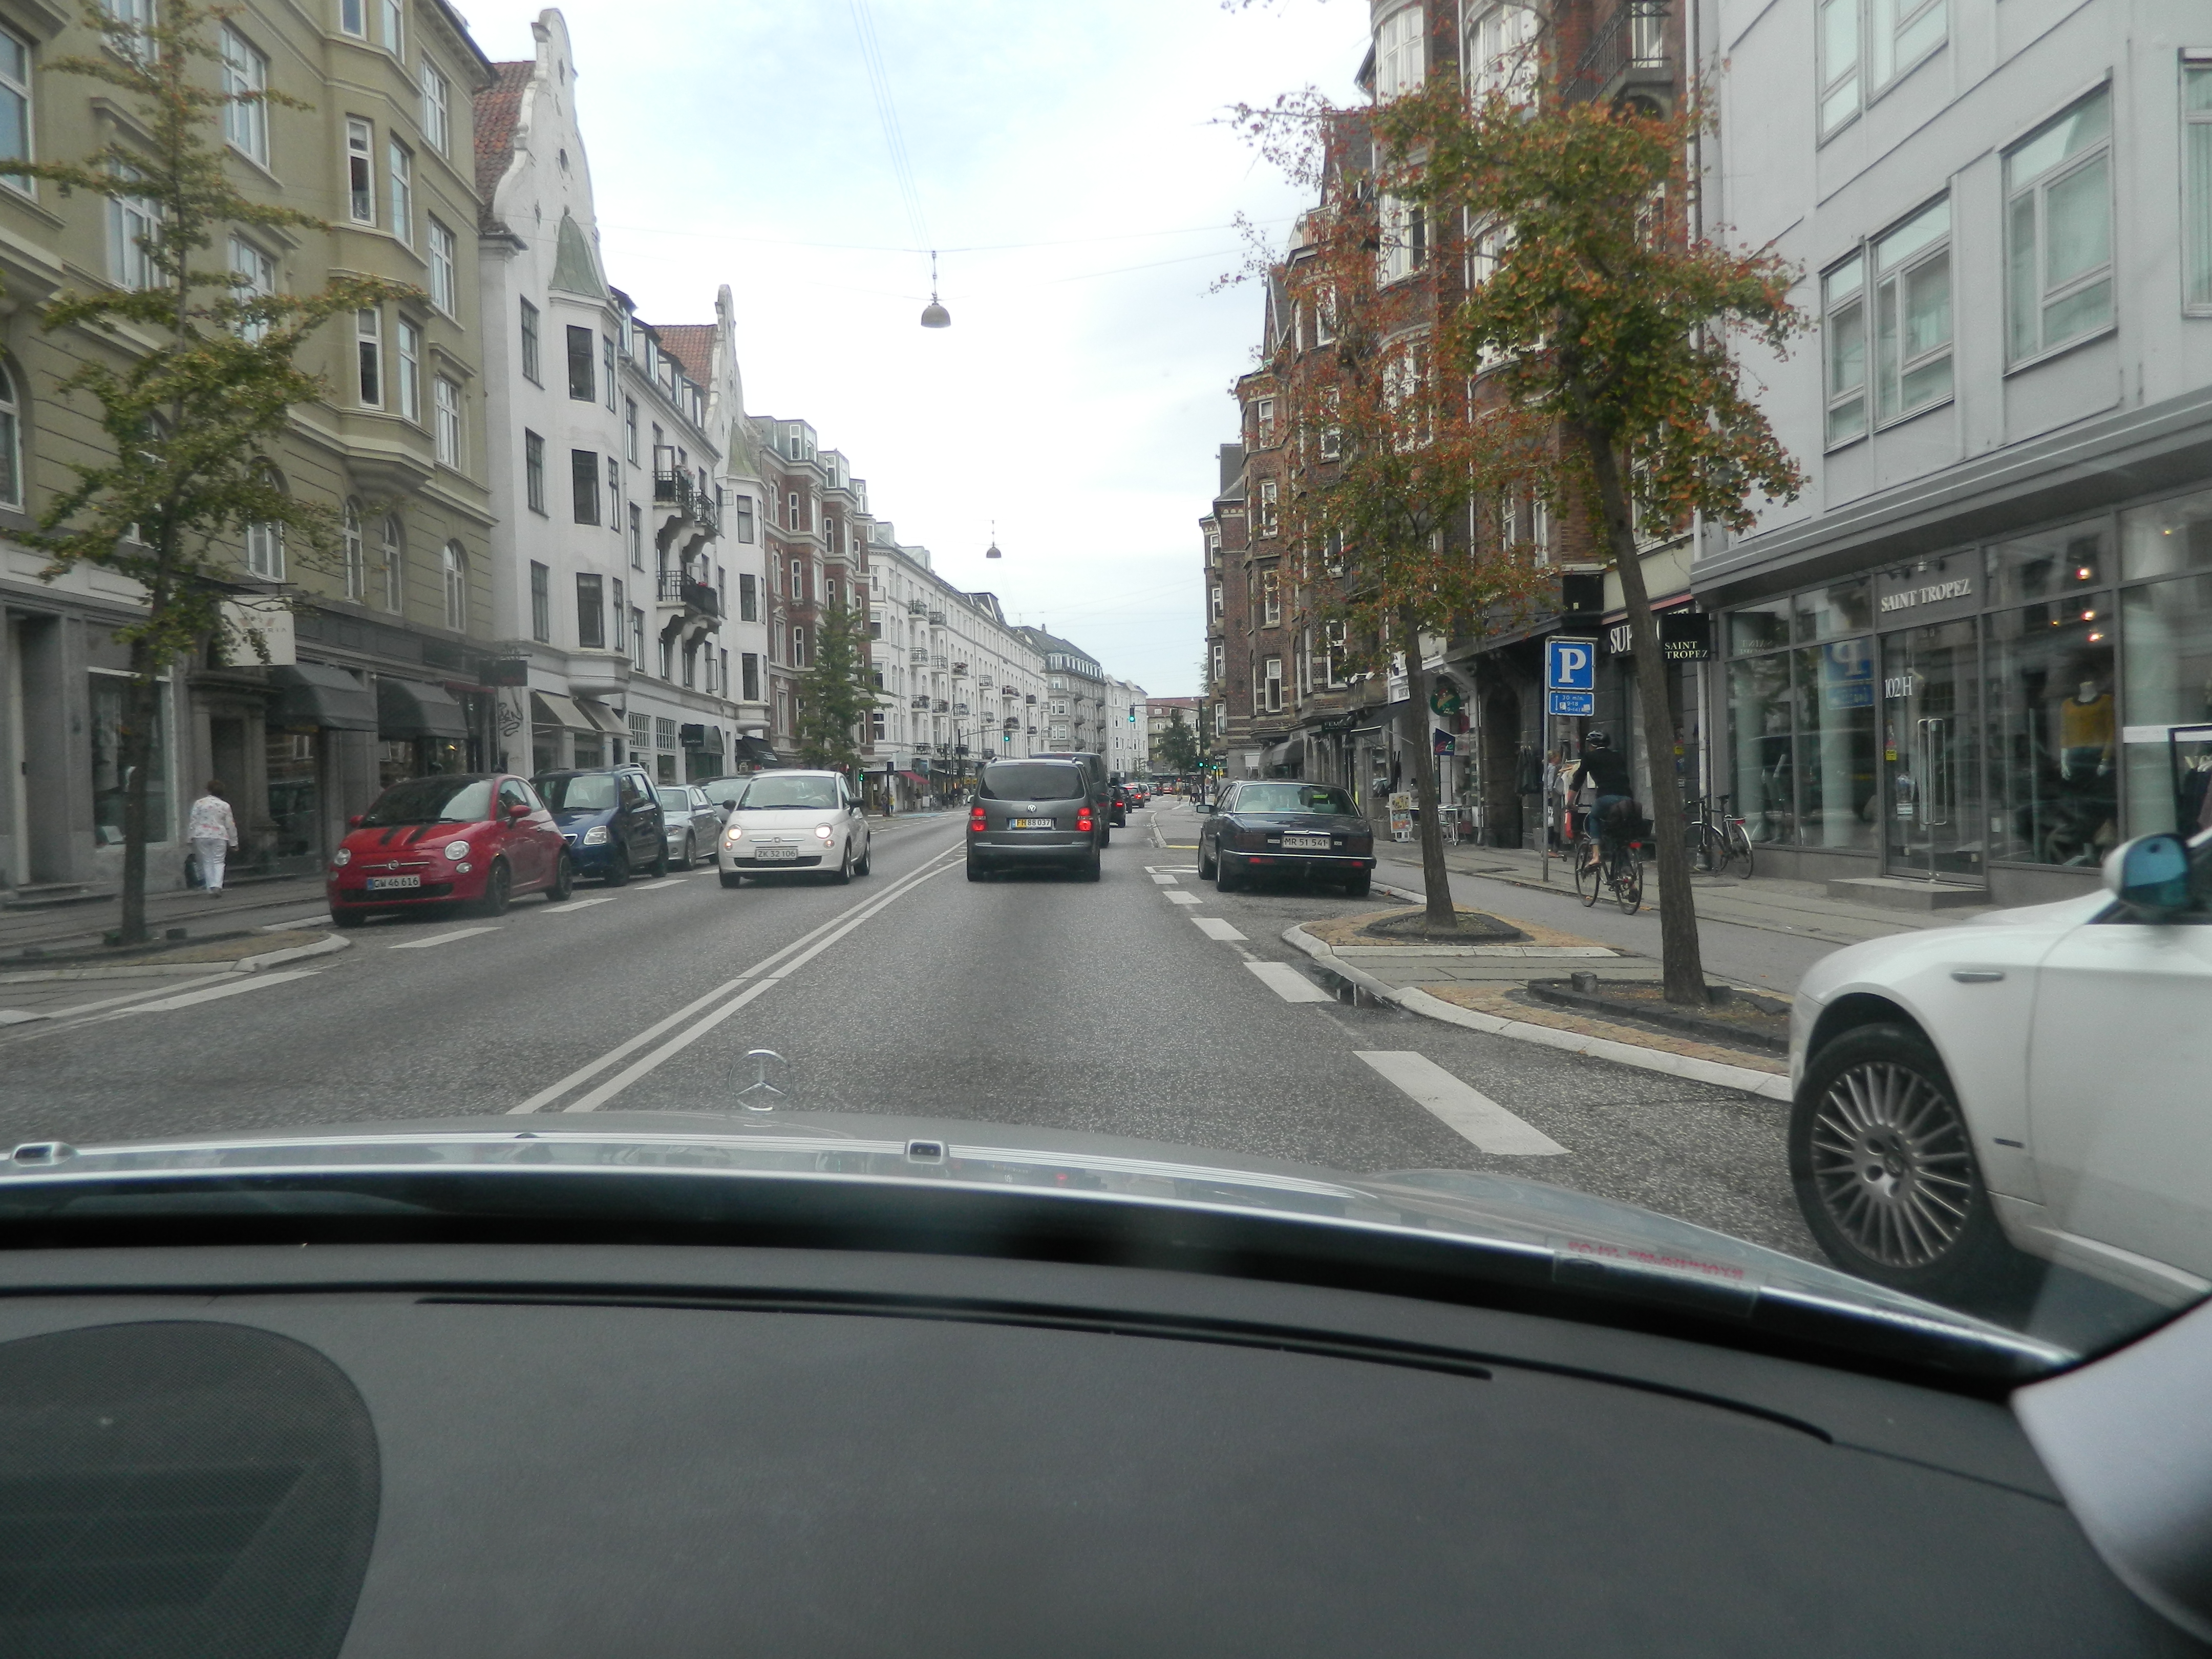 Local Round-Up: A few surprises among the richest and poorest districts in Copenhagen